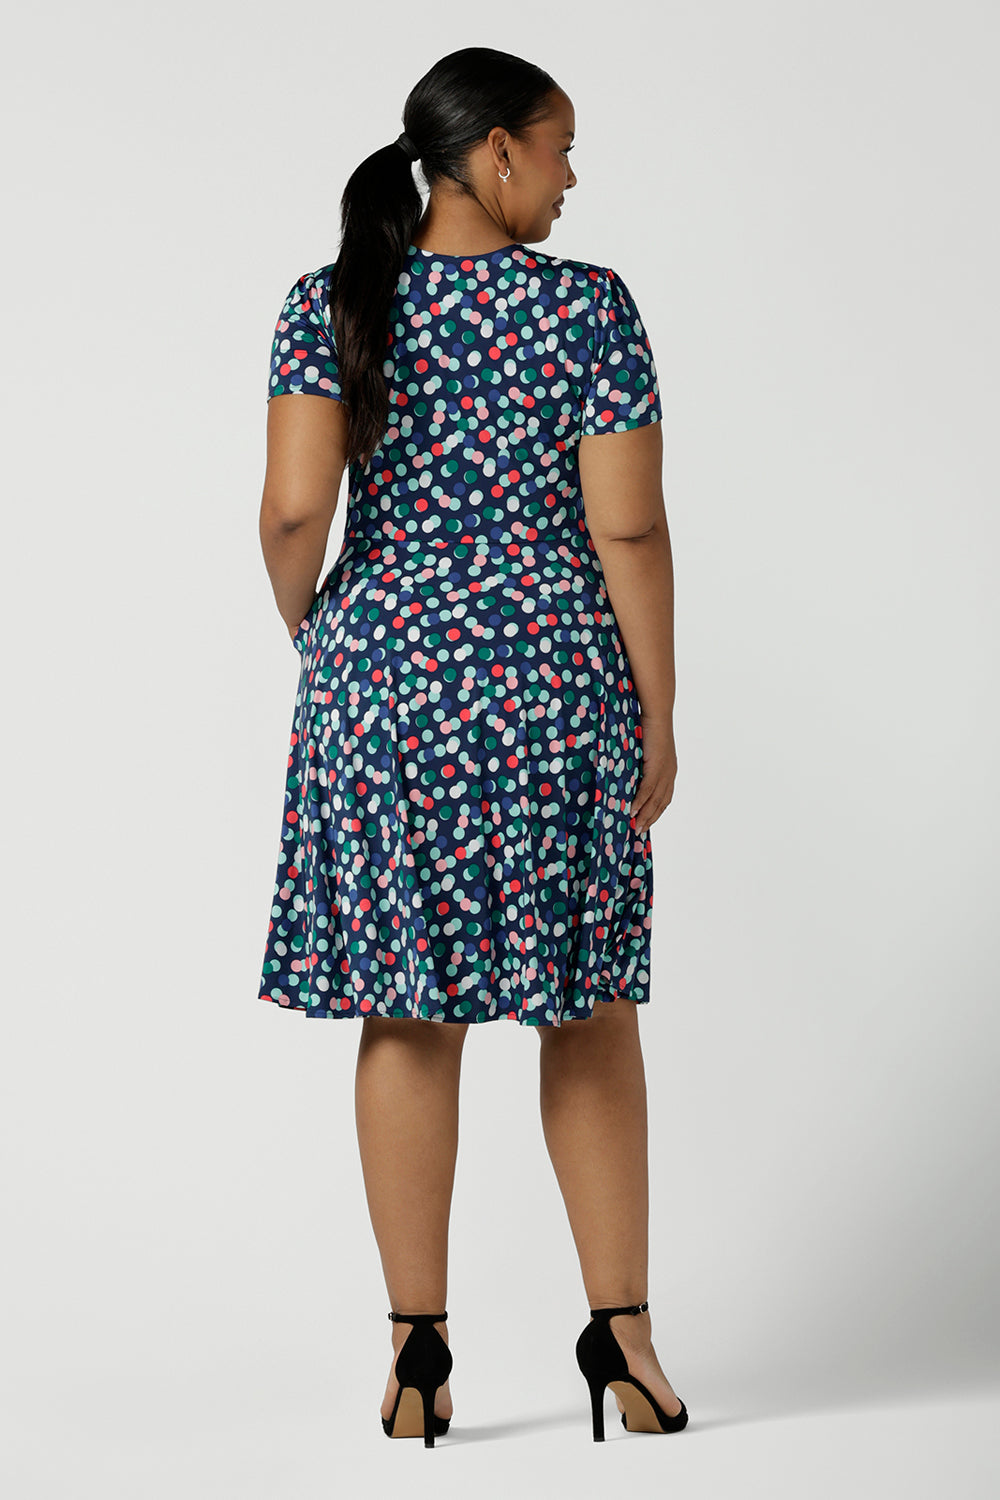 Back view of a curvy size 16 woman wears a Bubbles printed Jersey dress with a fixed wrap in a midi length. Styled back with a black heel. Perfect for work to weekend looks. Made in Australia for women size 8 - 24.